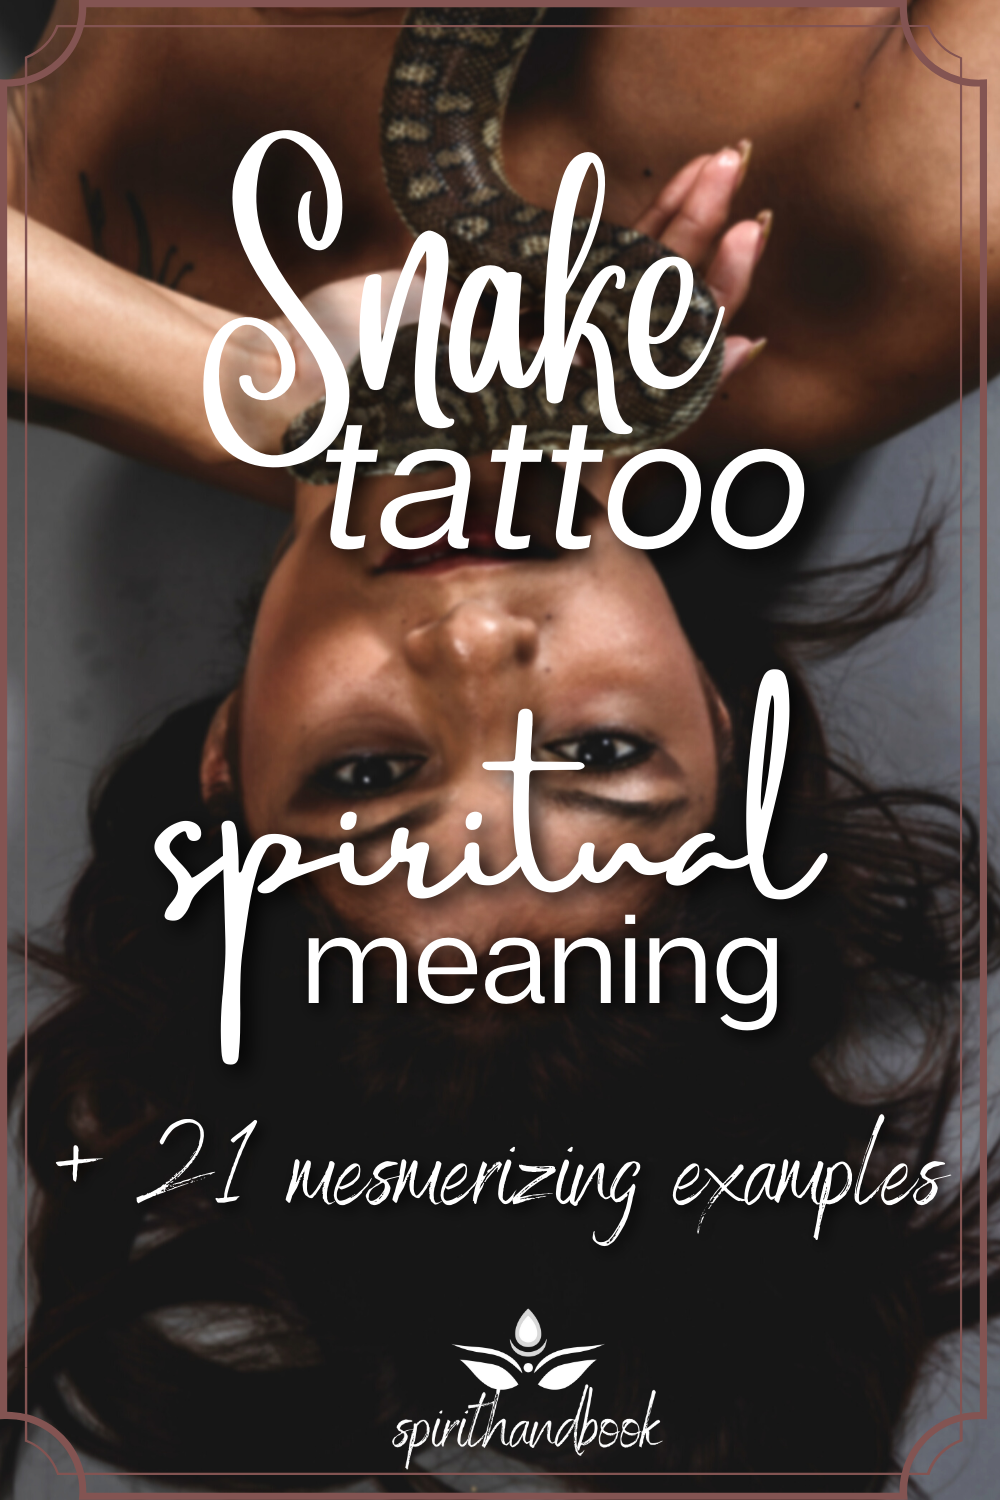 The Beautiful Spiritual Meaning Of A Snake Tattoo + 21 Mesmerizing Examples